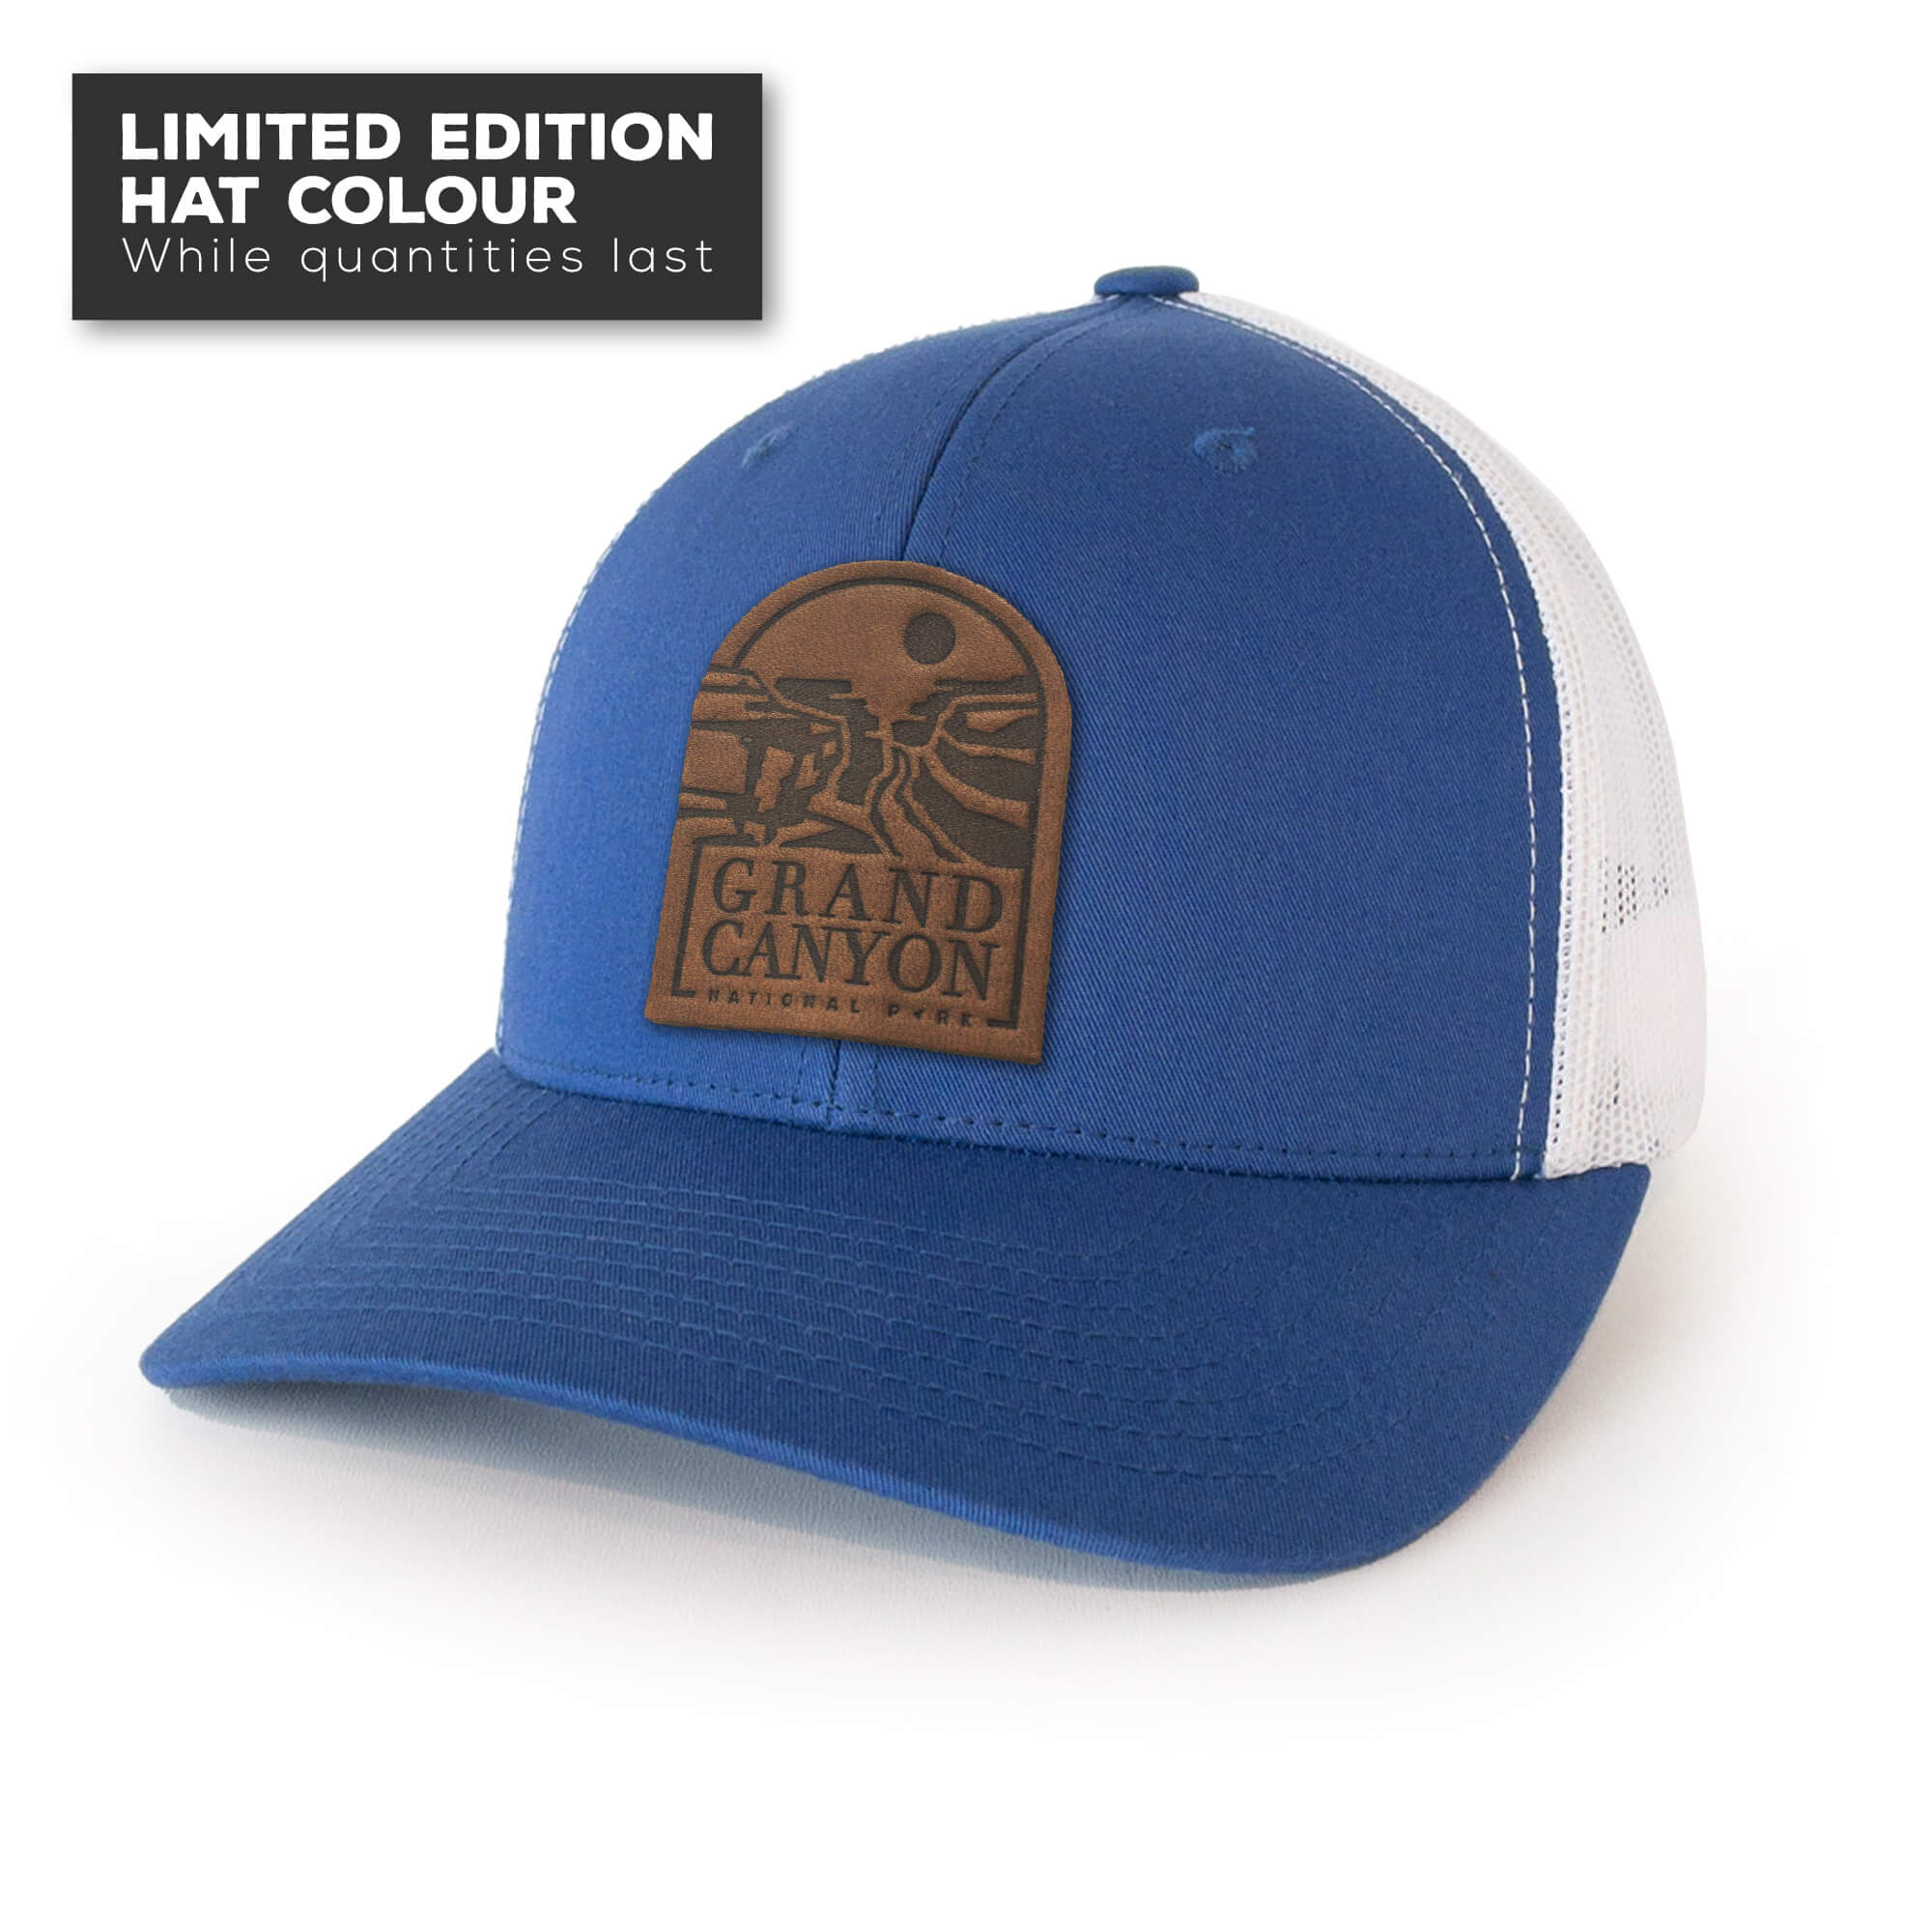 Royal Blue trucker hat with full-grain leather patch of Grand Canyon